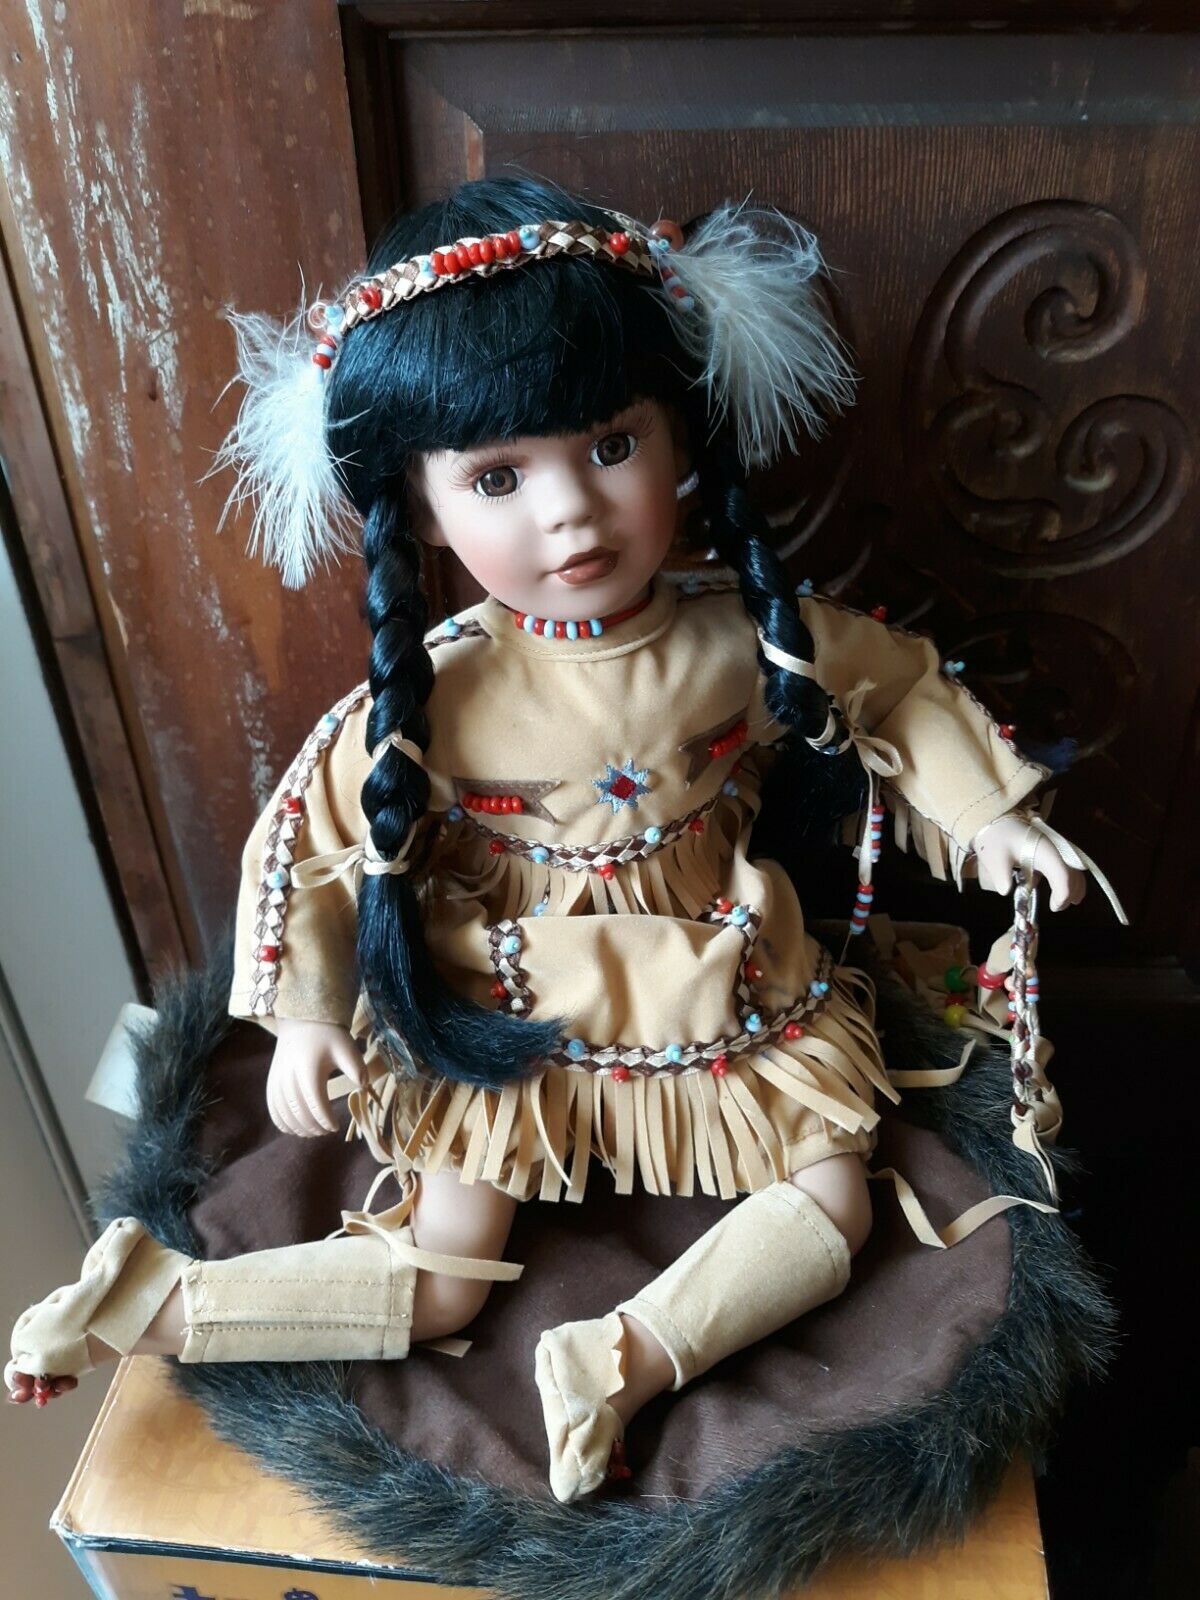 Native American "indian" Porcelain With Dream Catcher